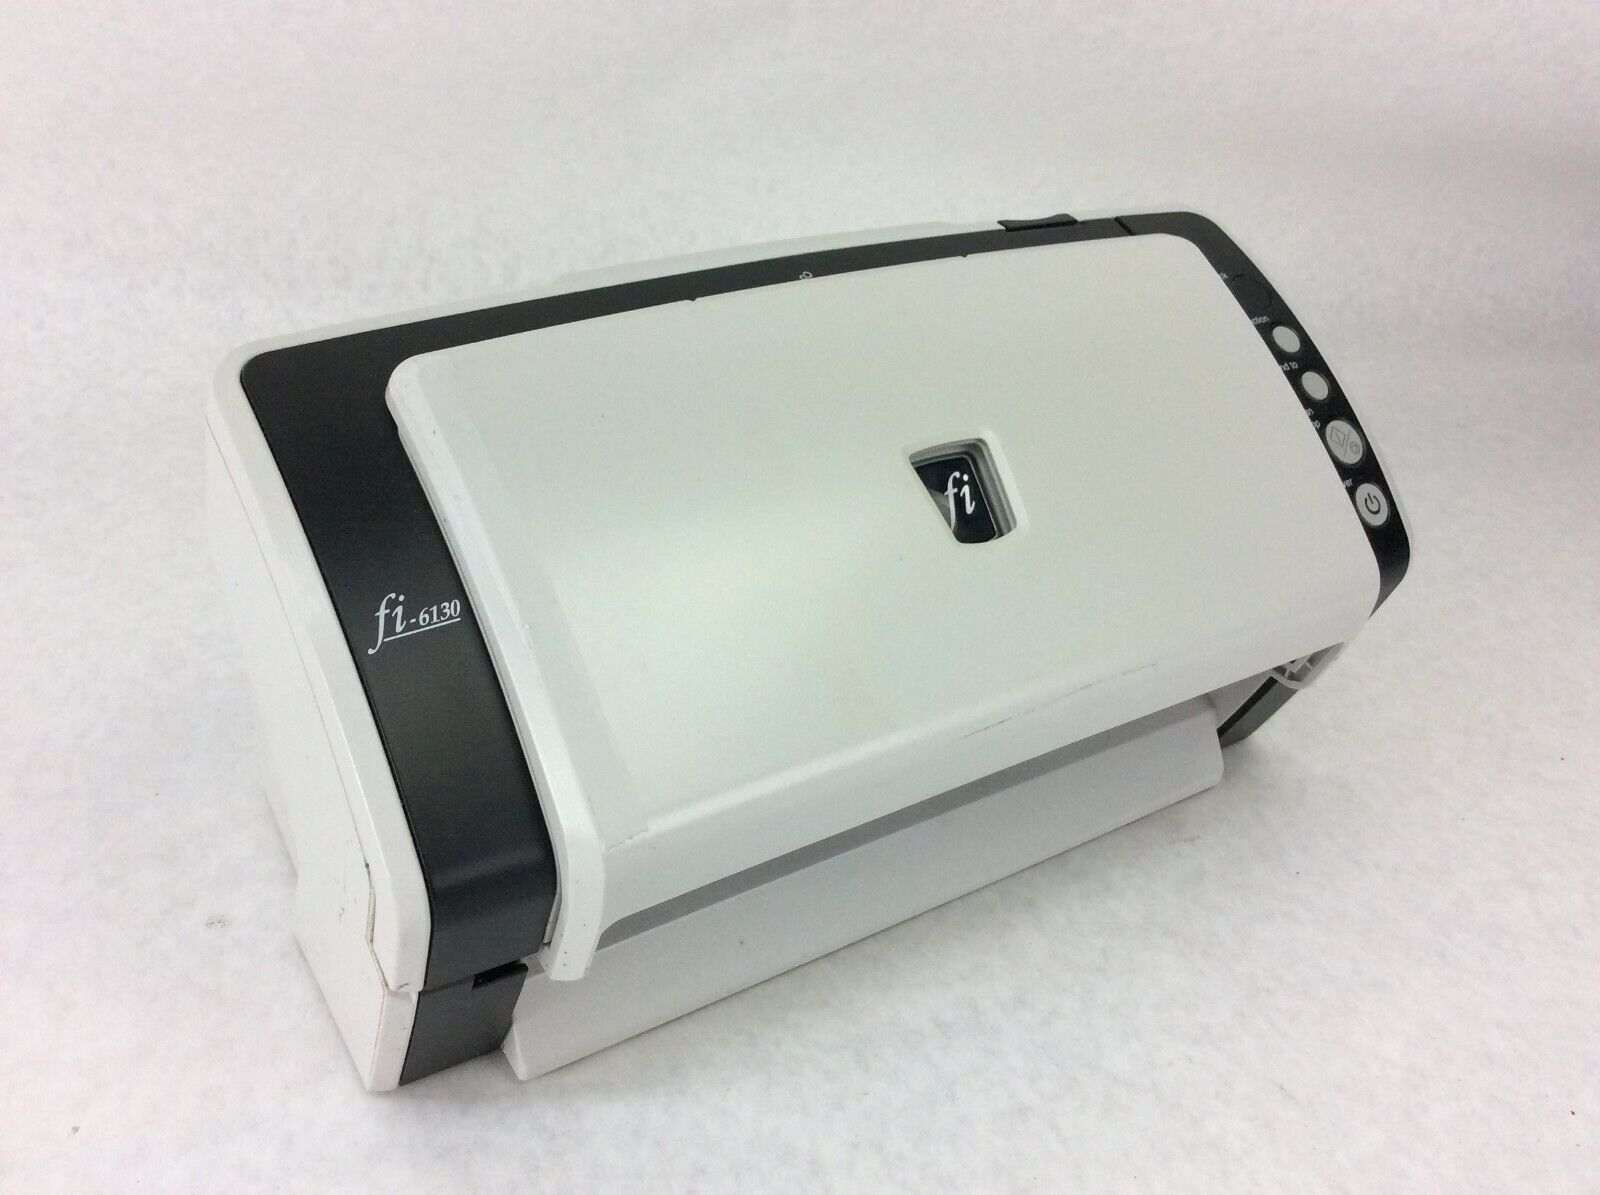 Fujitsu fi-6130 Duplex Document Color Scanner No Power Supply - Needs Rollers